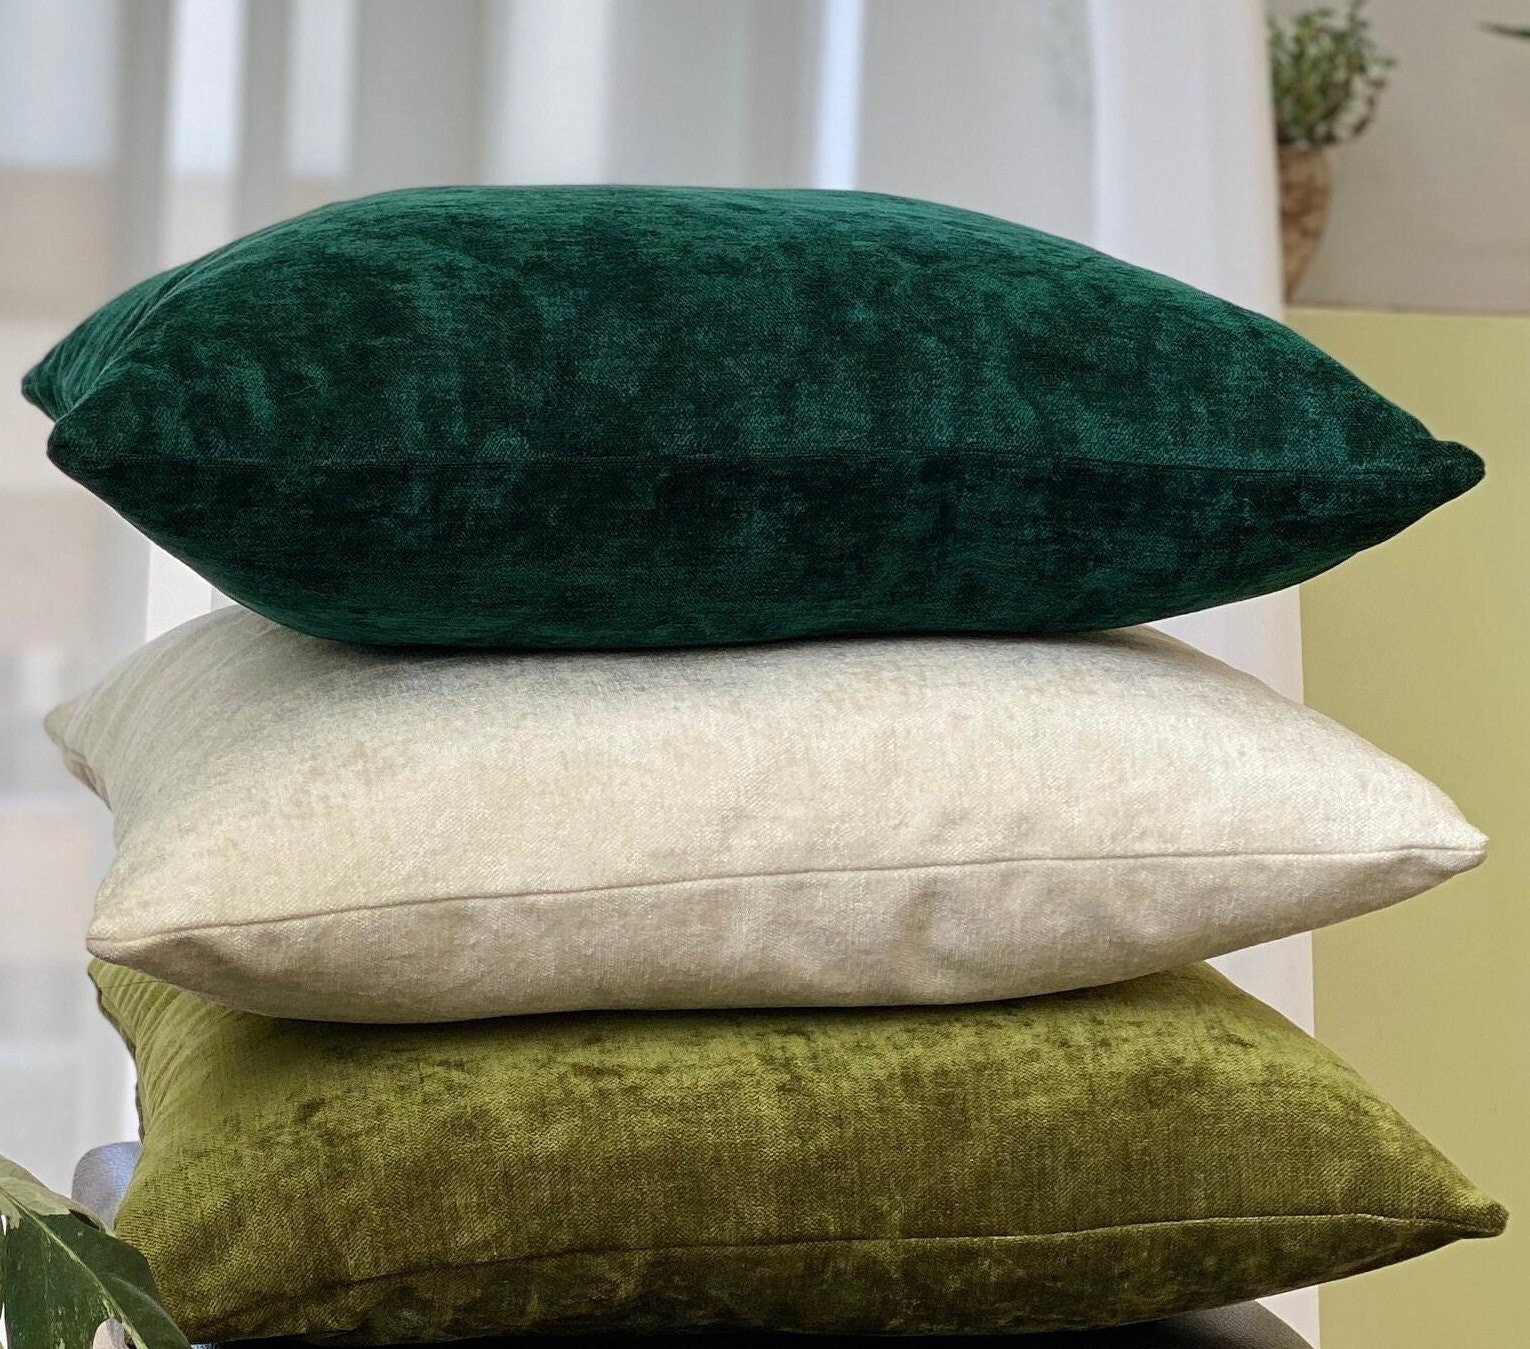 Decorative Pillows Cover Showroom Home Green Luxury Pillowcover